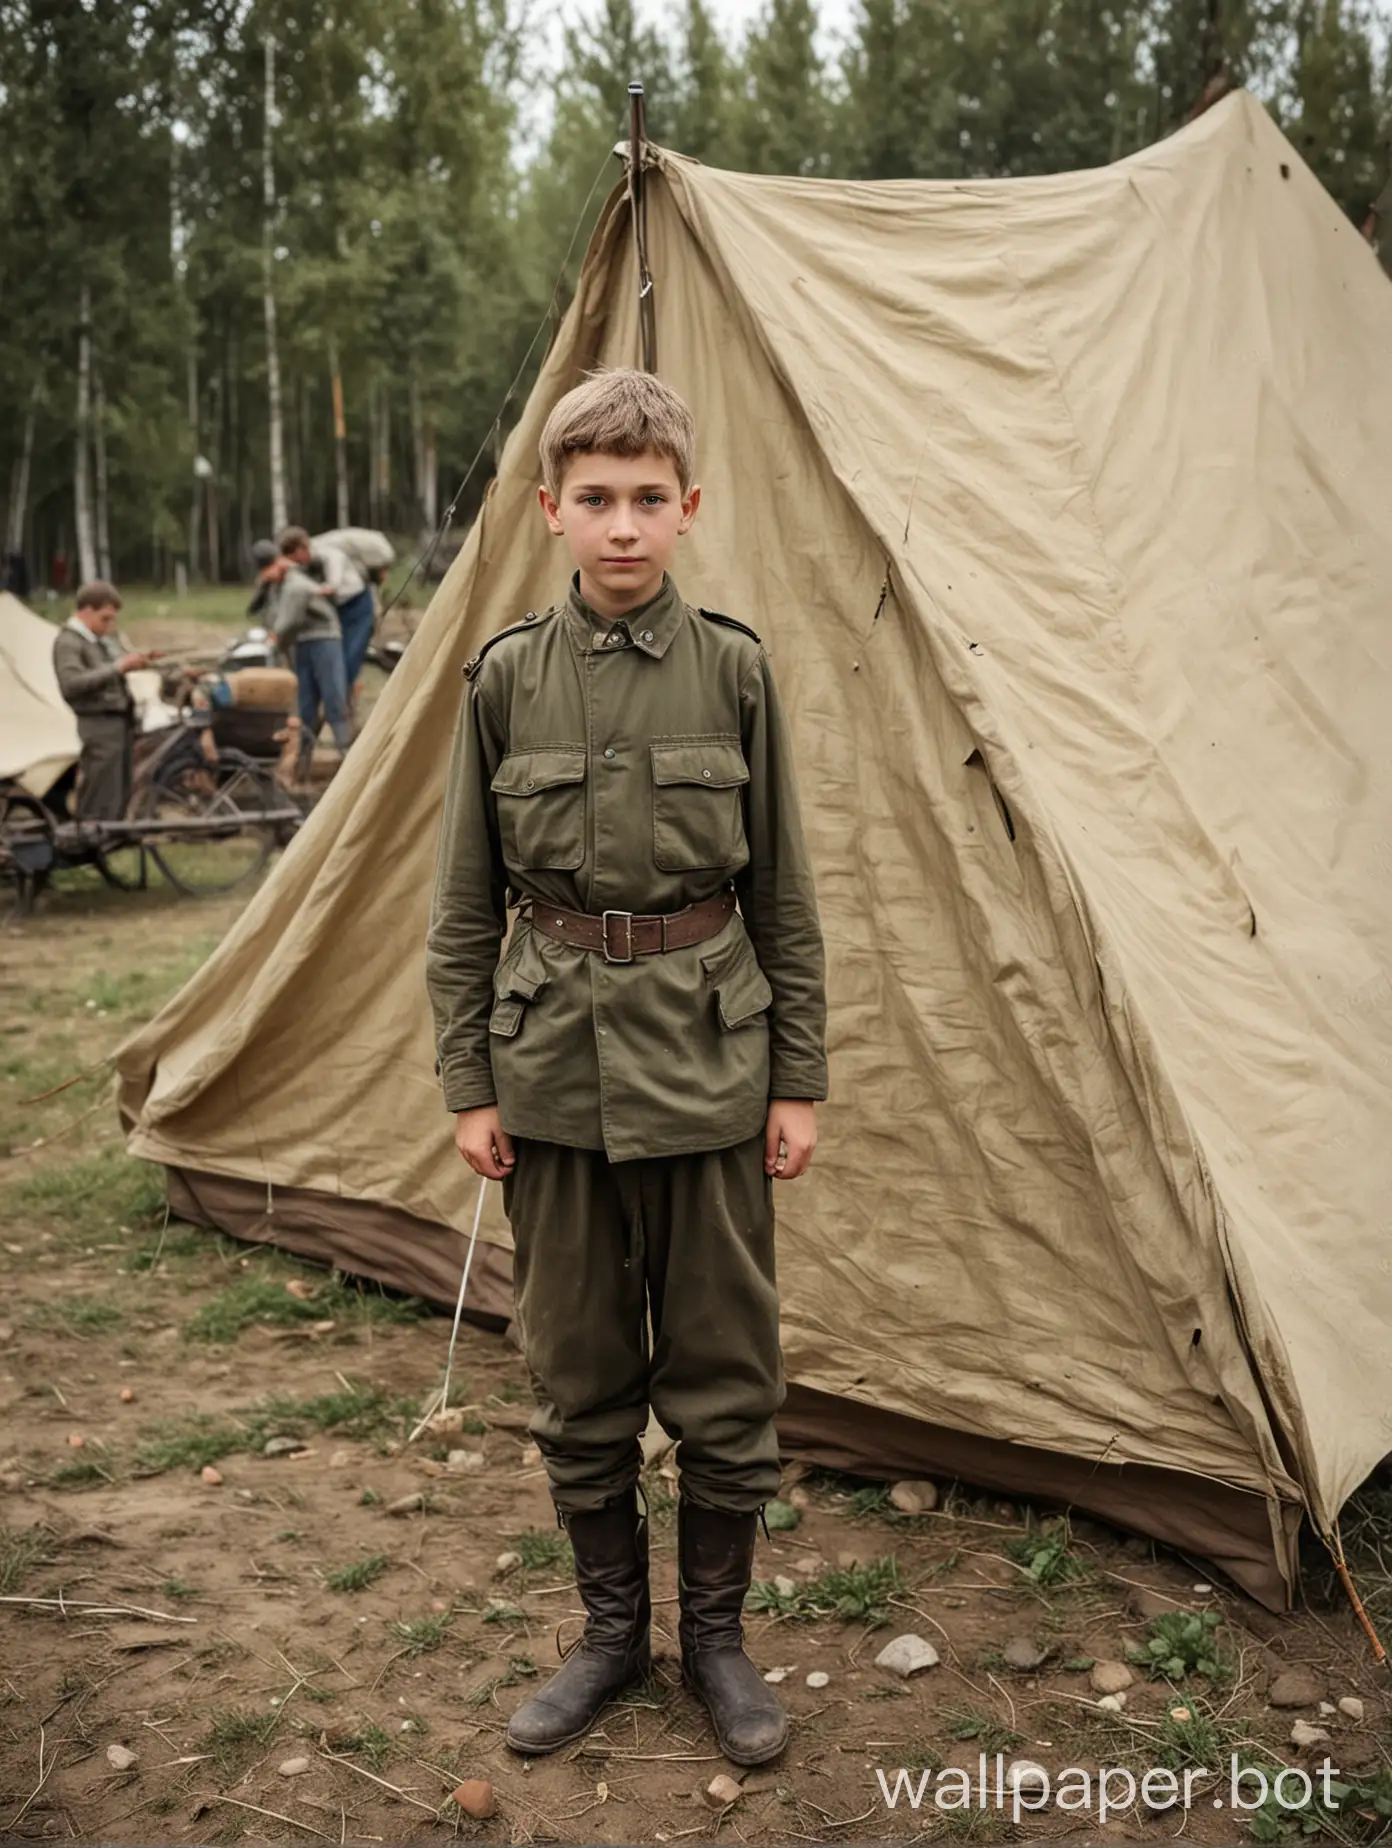 Soviet pioneer boy 13 years old, tent, full height, people in the background